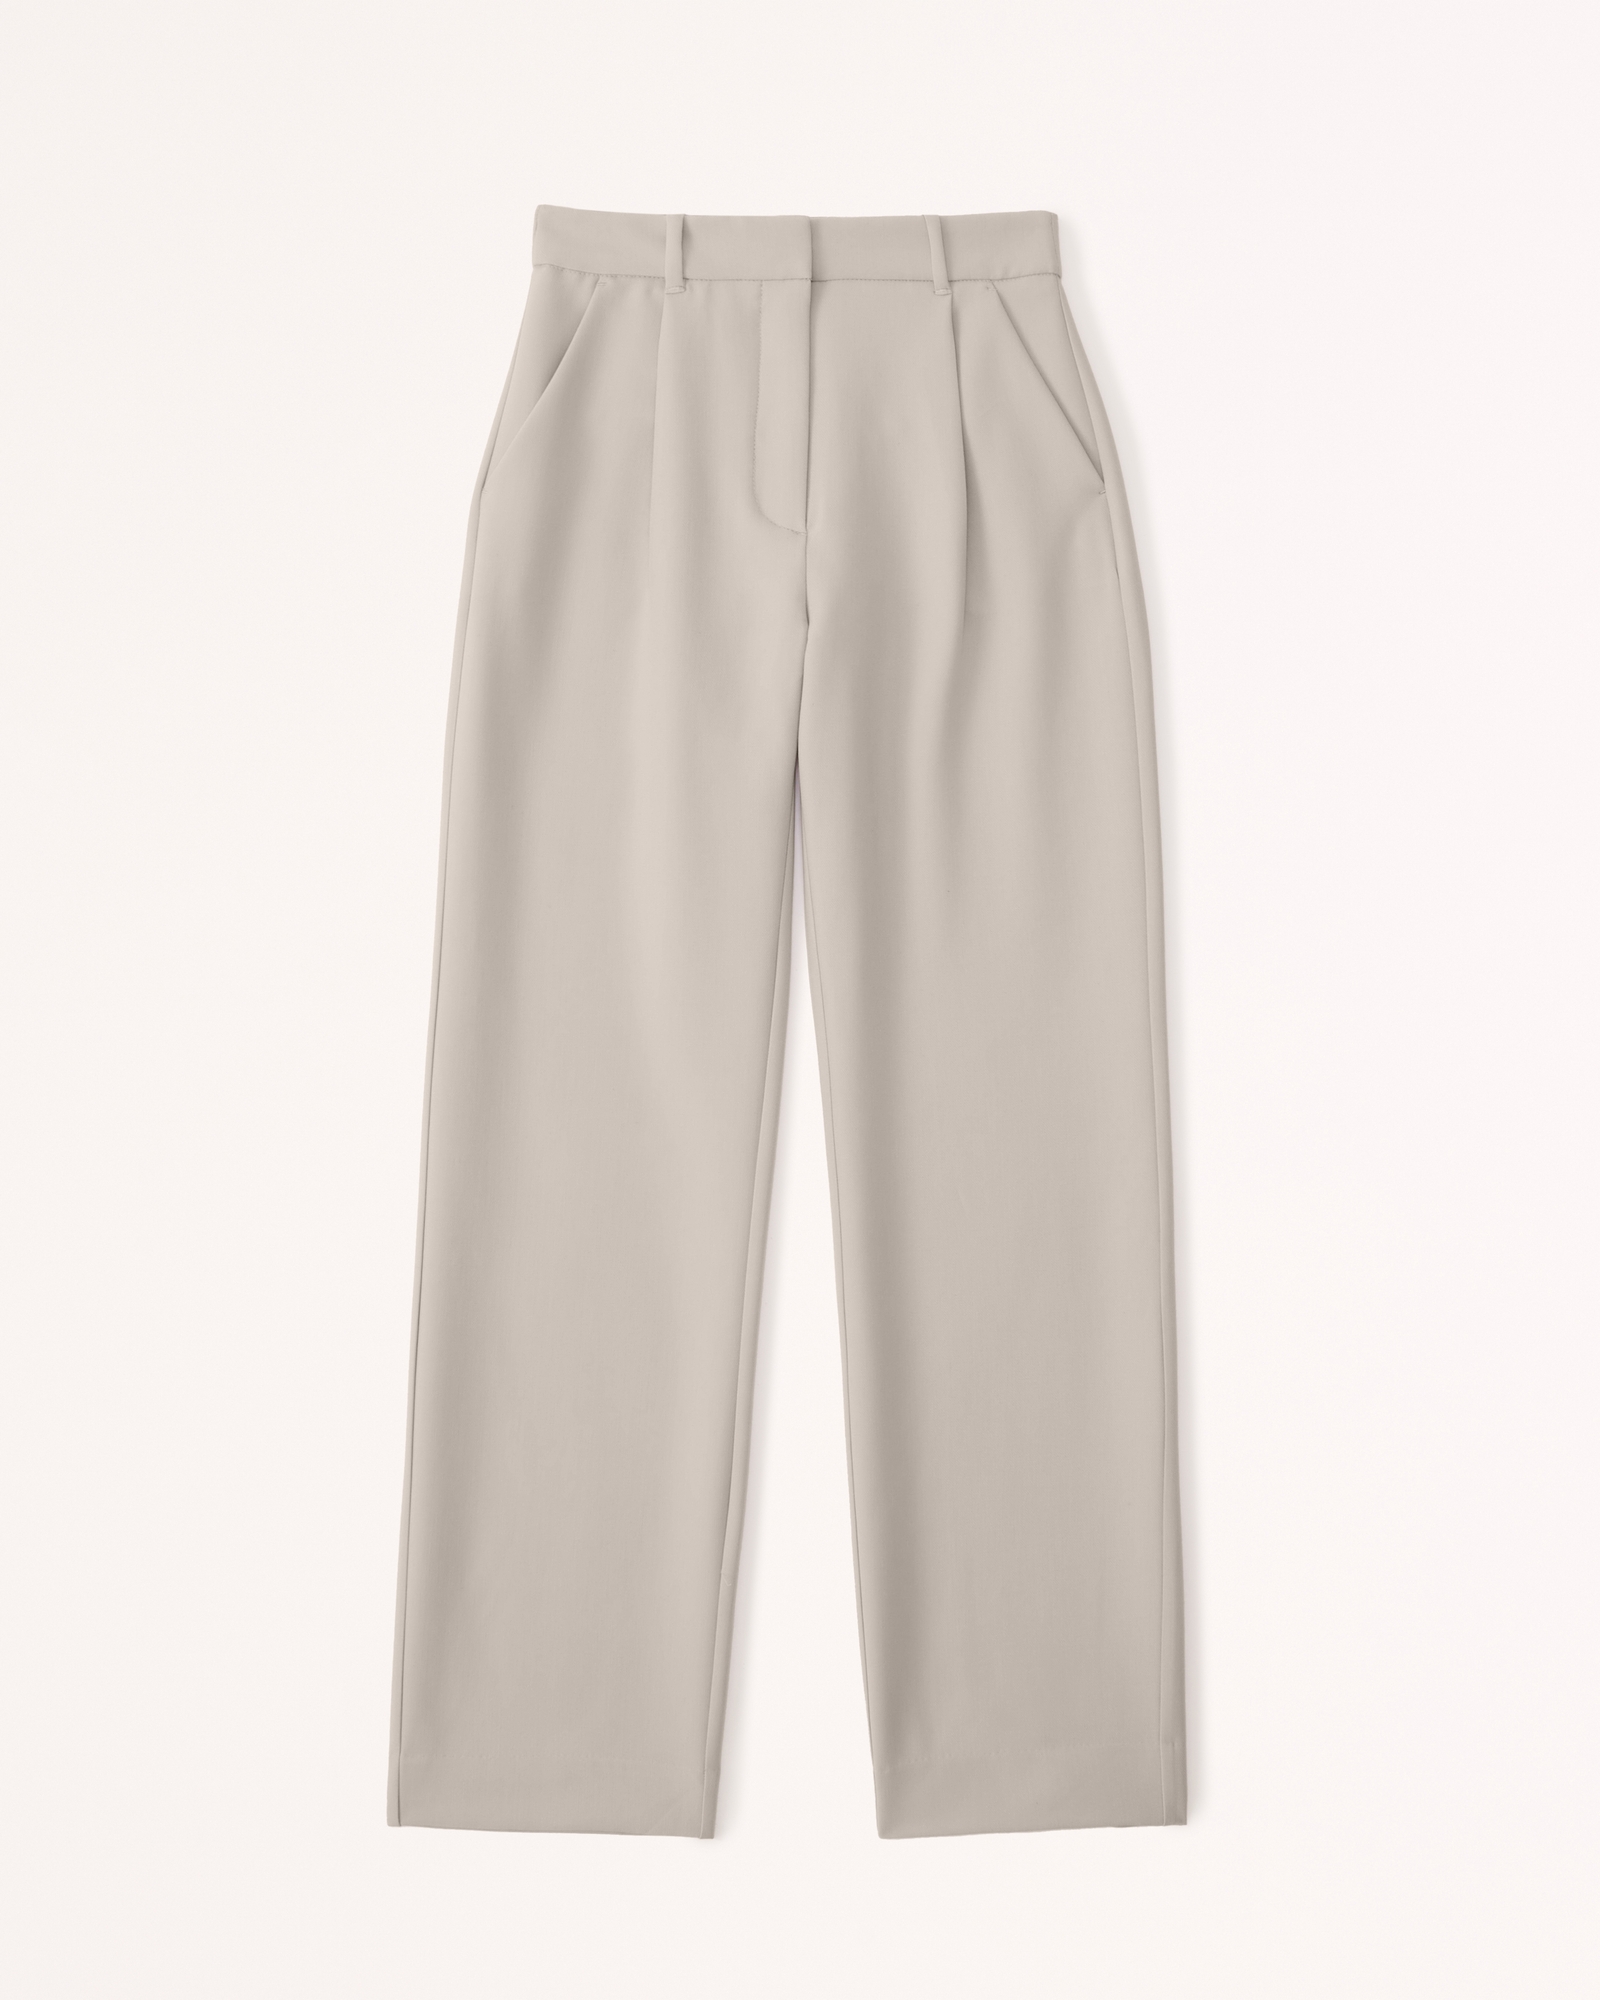 Neutral Tailored Trousers To Buy Now